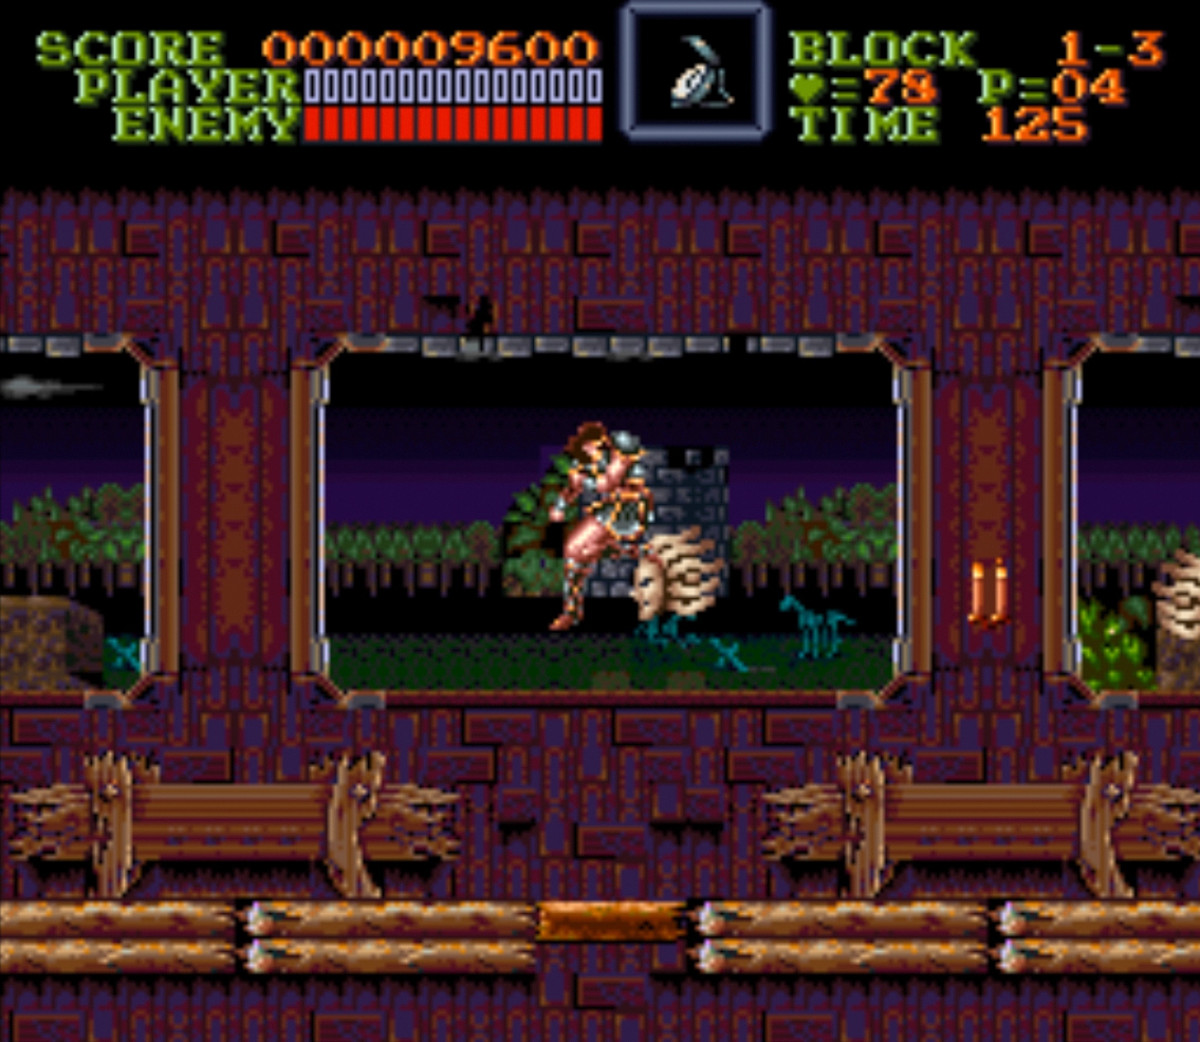 Fun "Castlevania" fact: Medusa heads have been a pain in the behind since the '80s.